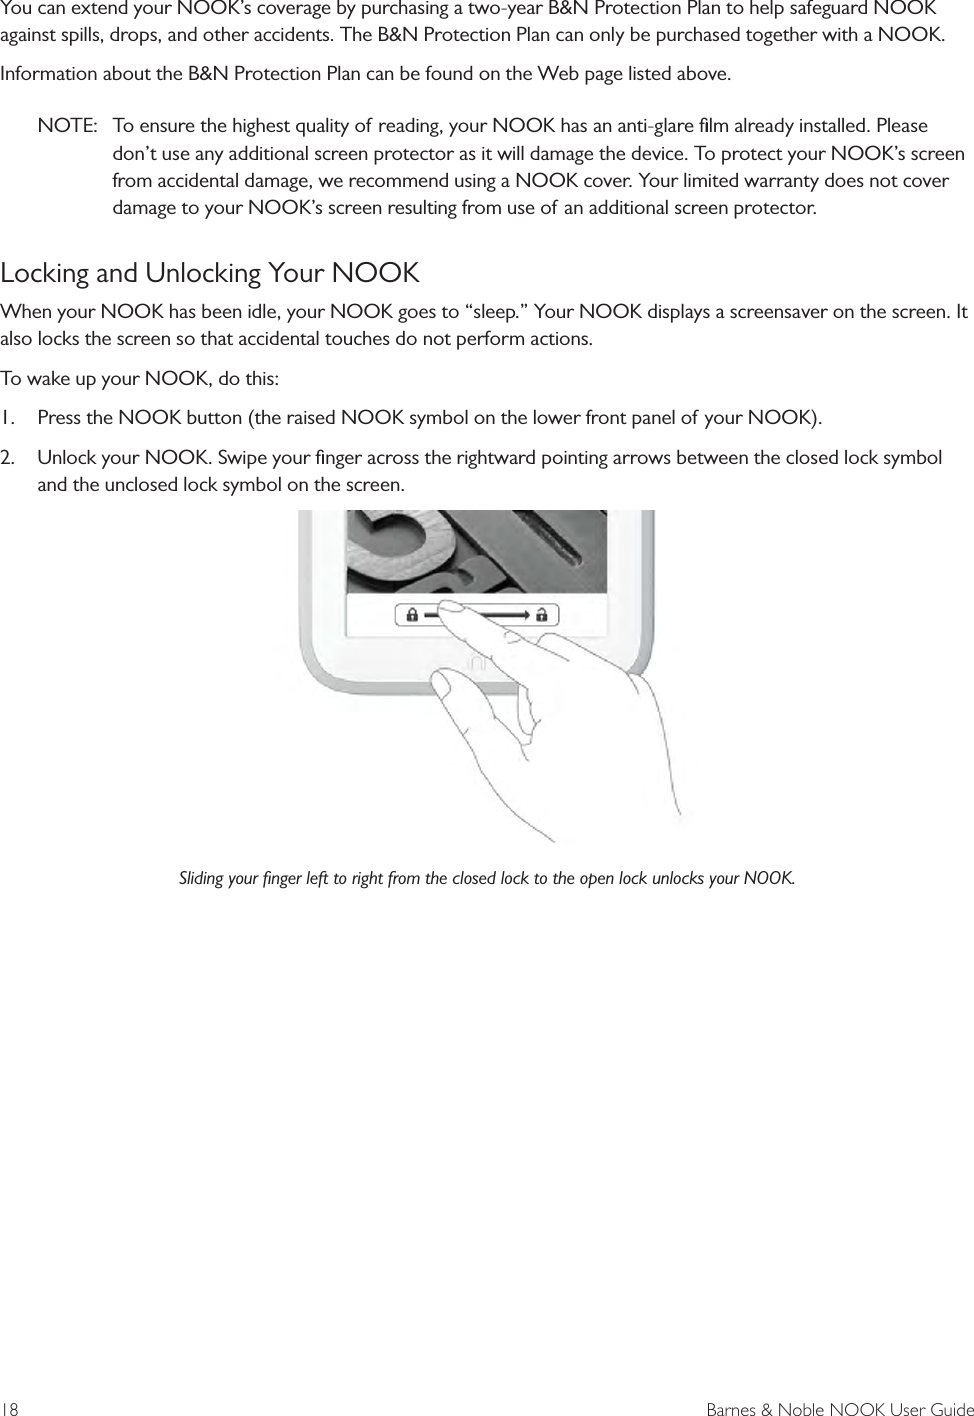 18  Barnes &amp; Noble NOOK User GuideYou can extend your NOOK’s coverage by purchasing a two-year B&amp;N Protection Plan to help safeguard NOOK against spills, drops, and other accidents. The B&amp;N Protection Plan can only be purchased together with a NOOK.Information about the B&amp;N Protection Plan can be found on the Web page listed above.NOTE:  To ensure the highest quality of reading, your NOOK has an anti-glare ﬁlm already installed. Please don’t use any additional screen protector as it will damage the device. To protect your NOOK’s screen from accidental damage, we recommend using a NOOK cover. Your limited warranty does not cover damage to your NOOK’s screen resulting from use of an additional screen protector.Locking and Unlocking Your NOOKWhen your NOOK has been idle, your NOOK goes to “sleep.” Your NOOK displays a screensaver on the screen. It also locks the screen so that accidental touches do not perform actions. To wake up your NOOK, do this:1.  Press the NOOK button (the raised NOOK symbol on the lower front panel of your NOOK).2.  Unlock your NOOK. Swipe your ﬁnger across the rightward pointing arrows between the closed lock symbol and the unclosed lock symbol on the screen.Sliding your ﬁnger left to right from the closed lock to the open lock unlocks your NOOK.